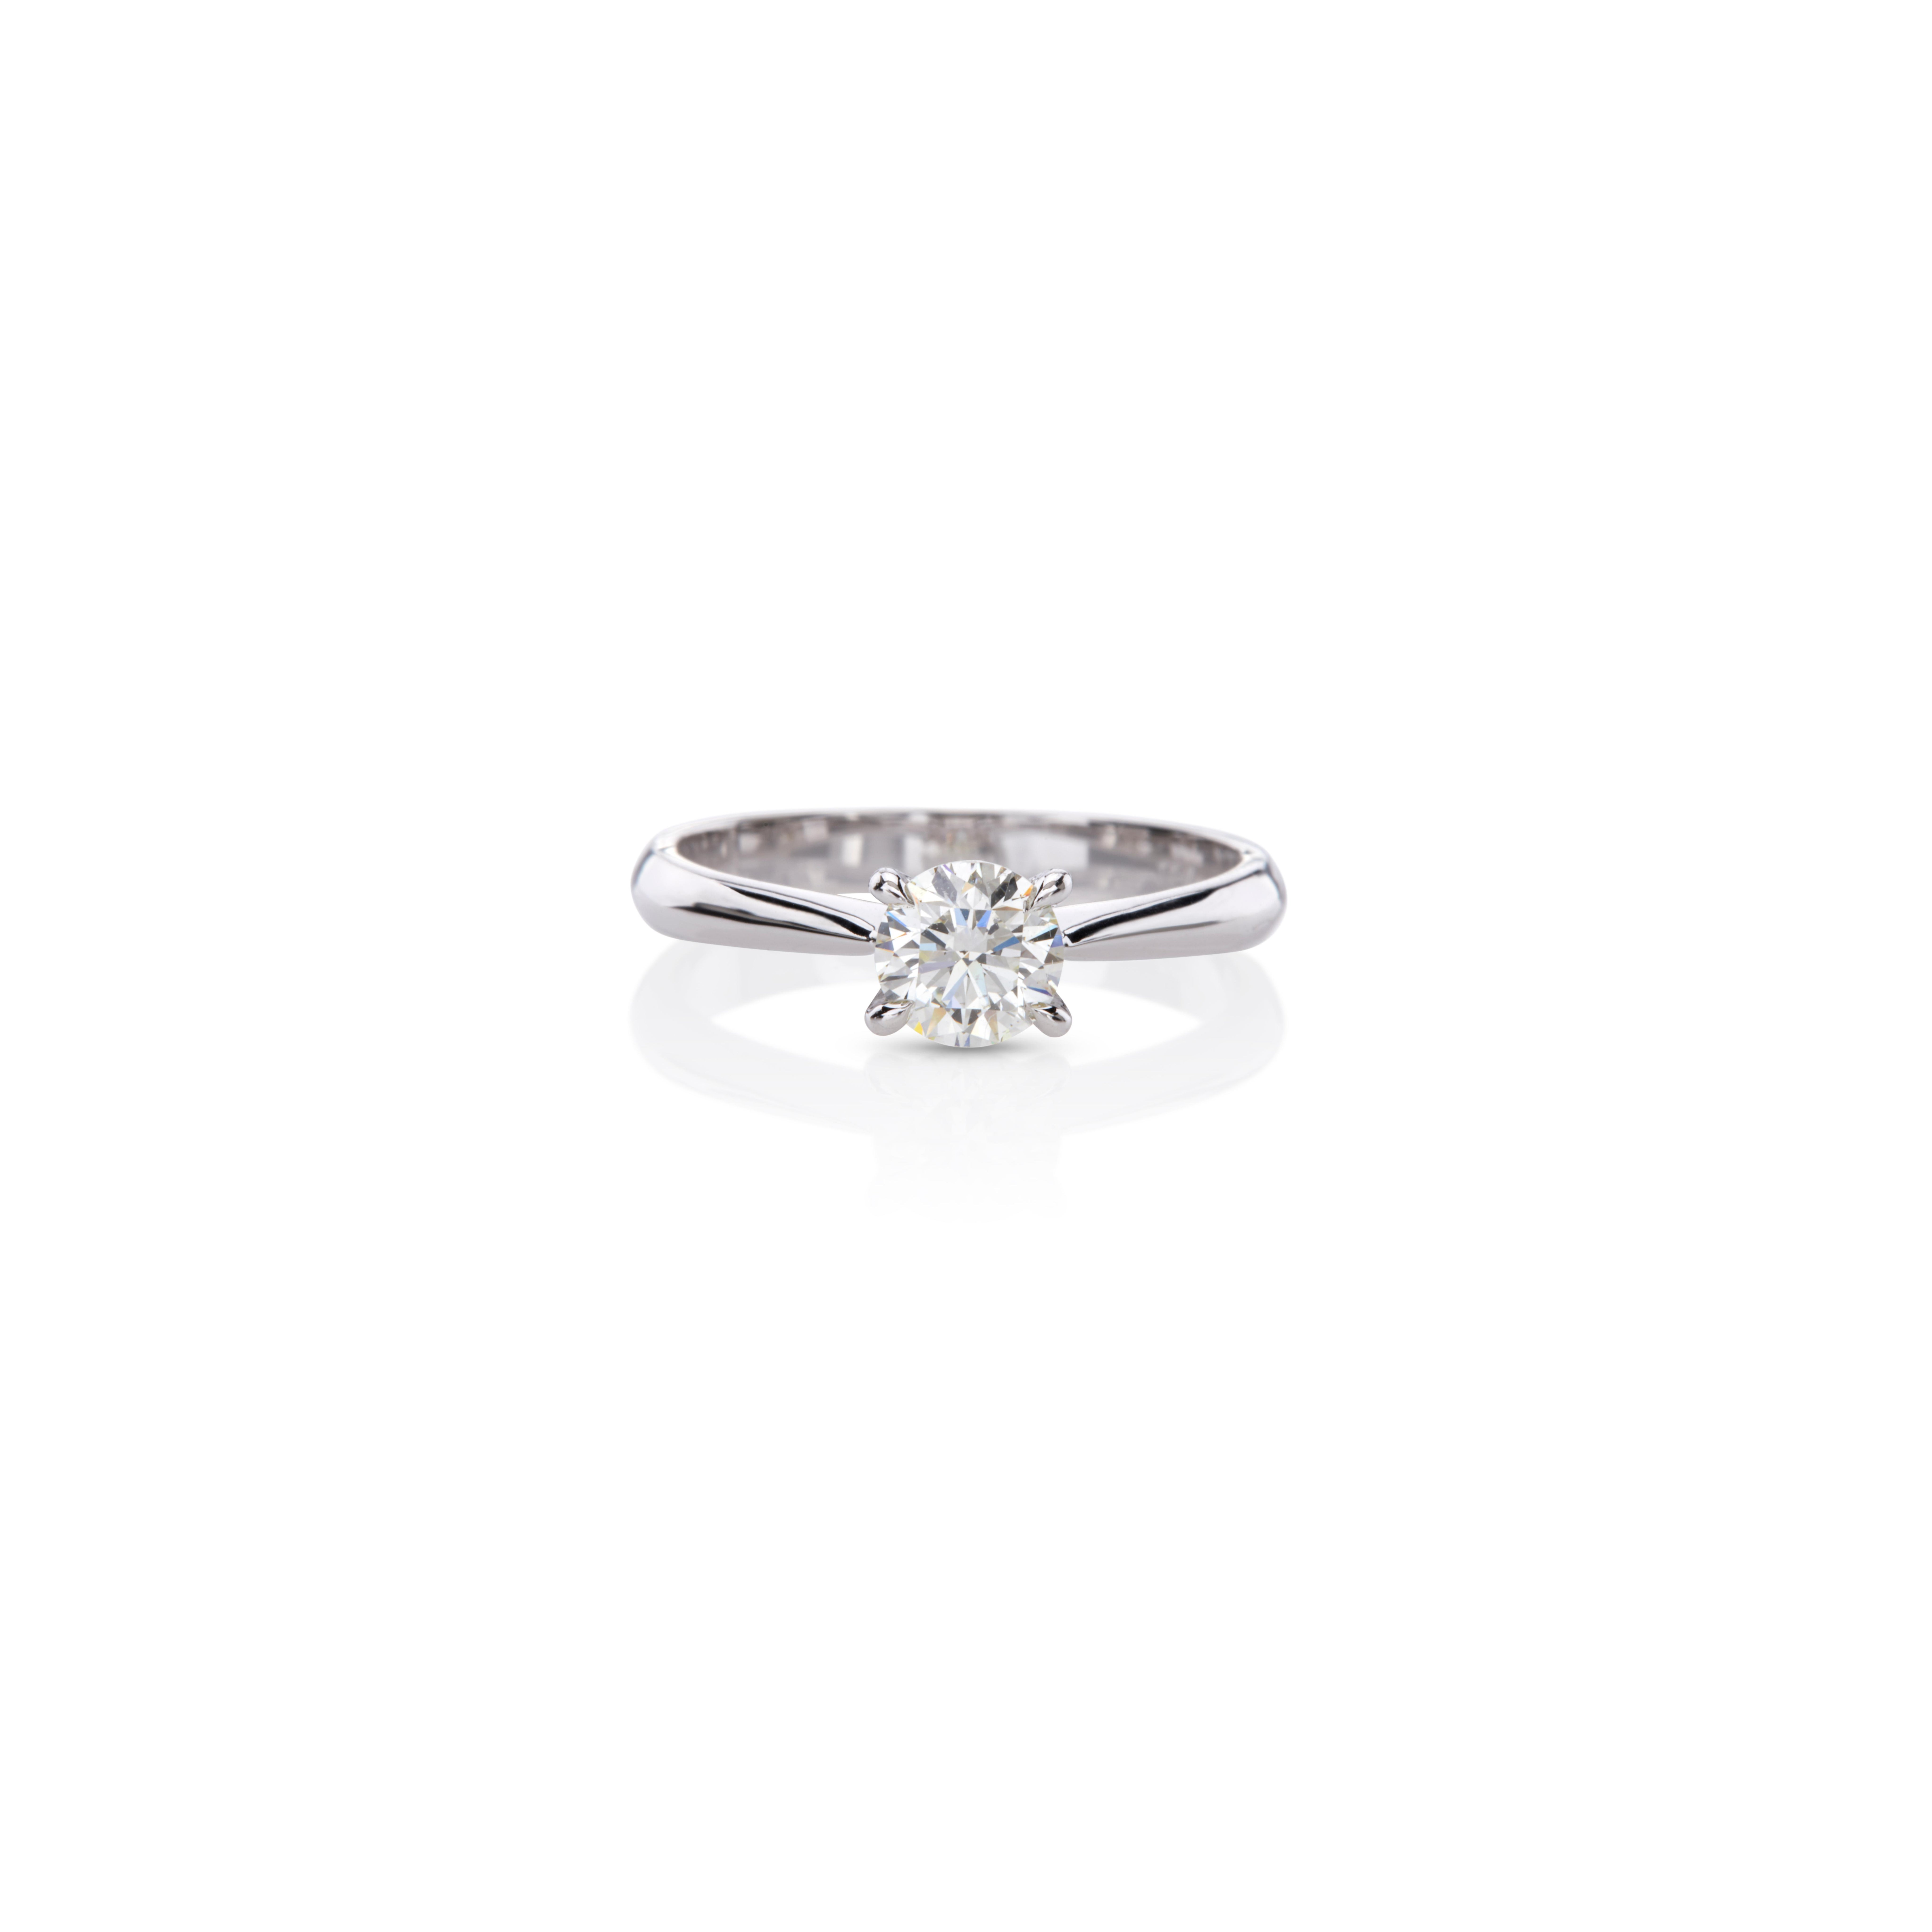 Unique Solitaire Ring made of 18Kt white gold and a round GIA Certified 0.72ct brilliant cut diamond with four prongs setting. This simple setting enhances a diamond’s natural beauty and brilliance and promises to be a timeless fine jewelry design.